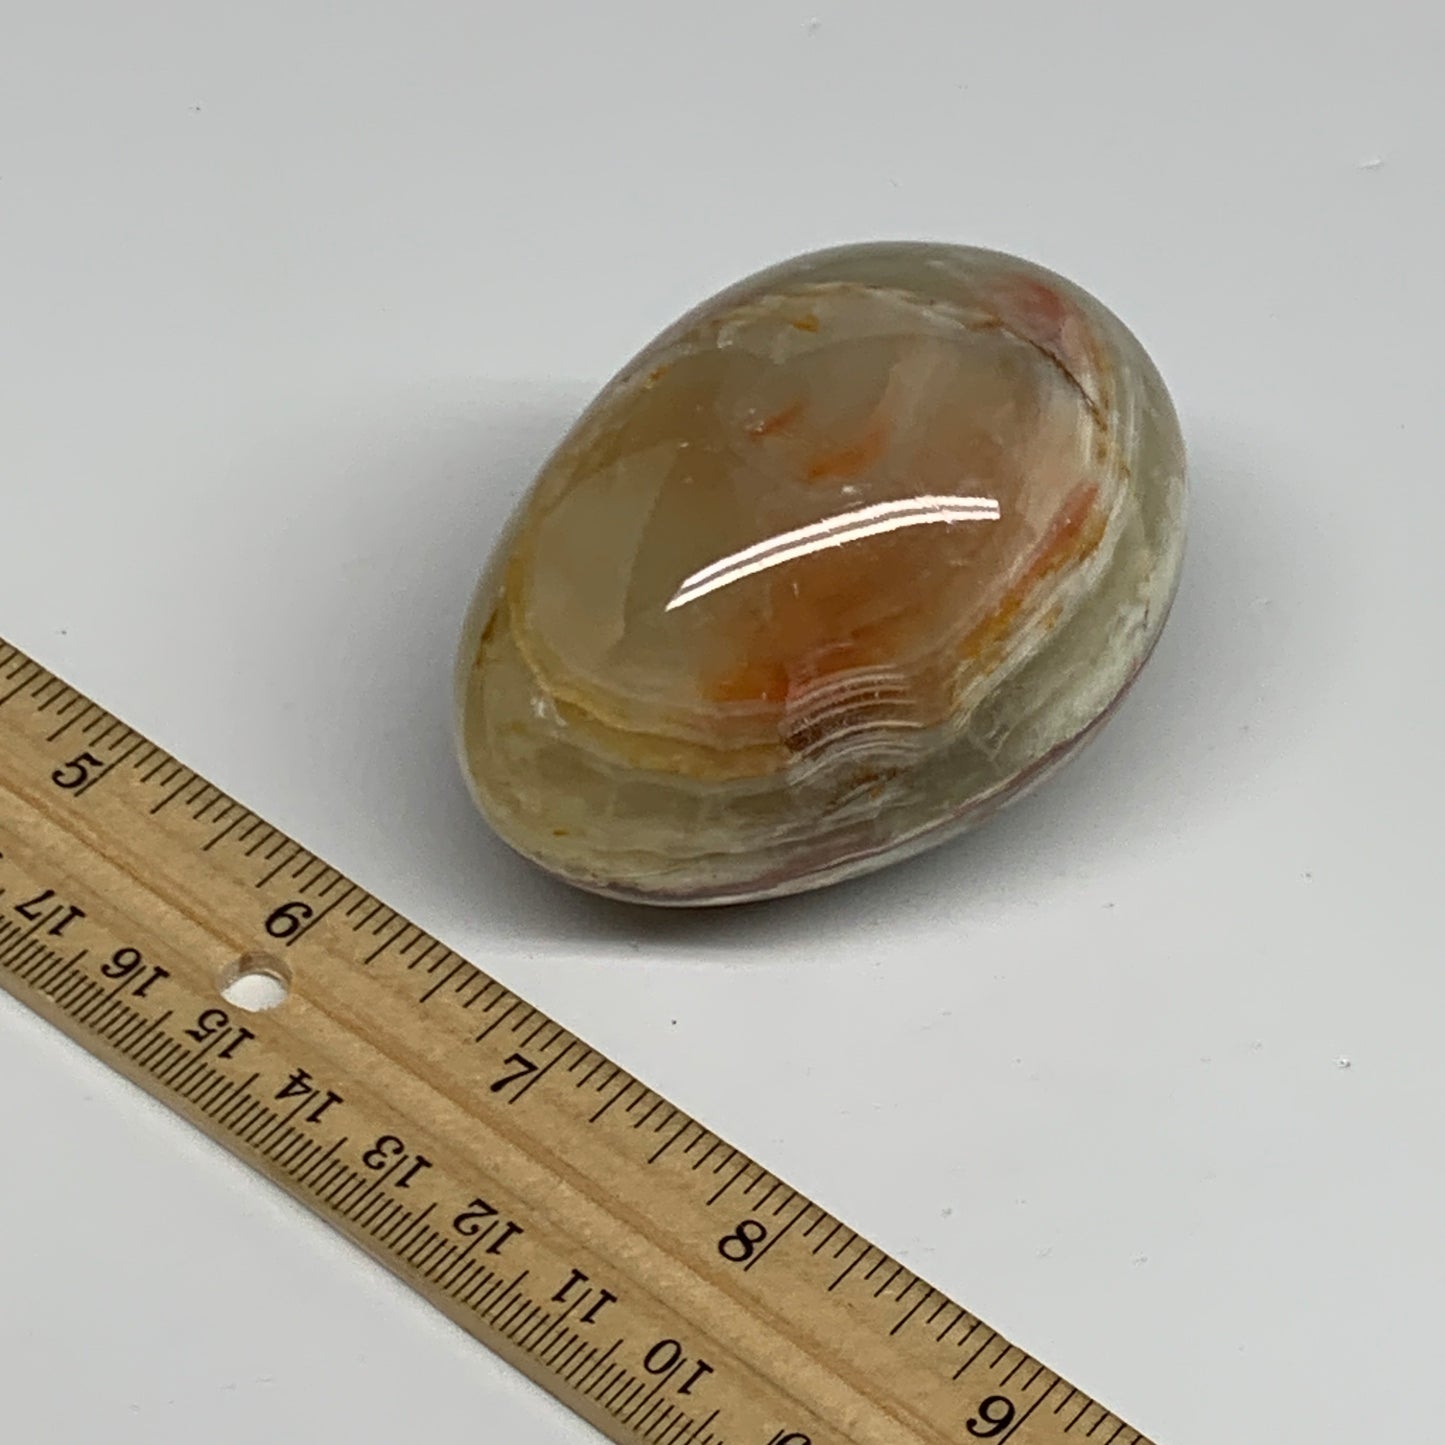 260g, 2.8"x2" Natural Green Onyx Egg Gemstone Mineral, from Pakistan, B32035